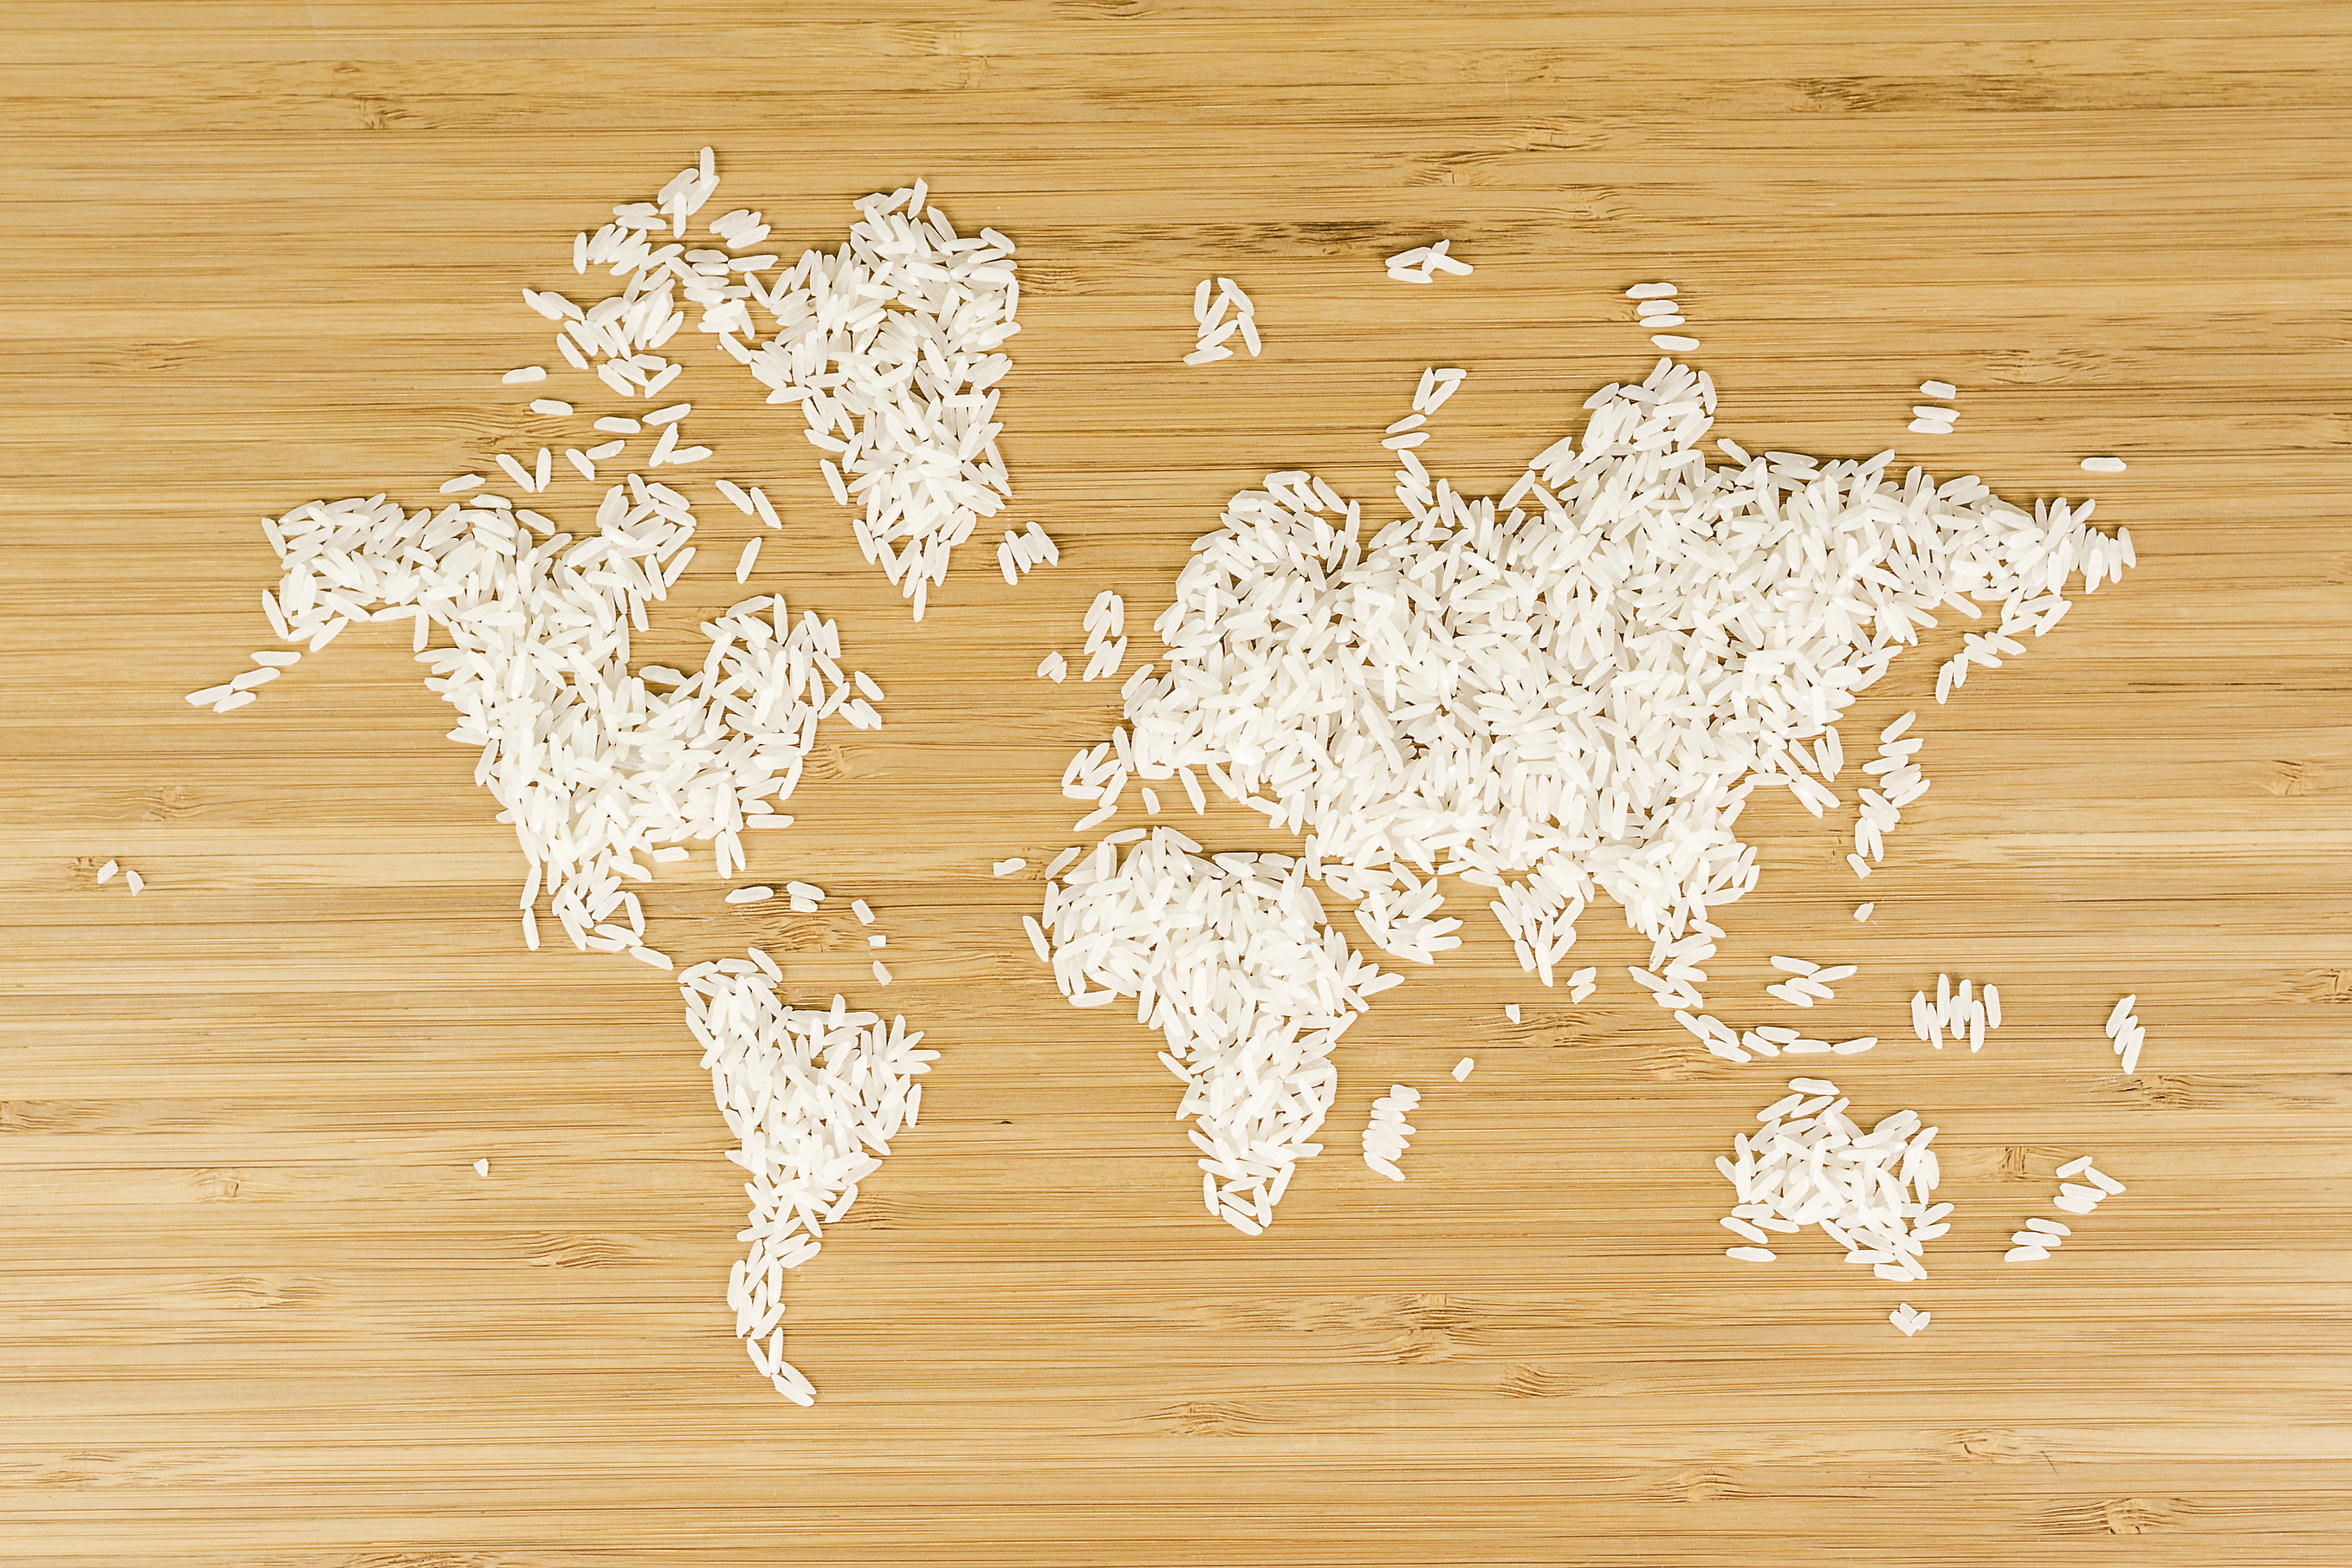 map of the world made of white rice 000079002509 Large 1